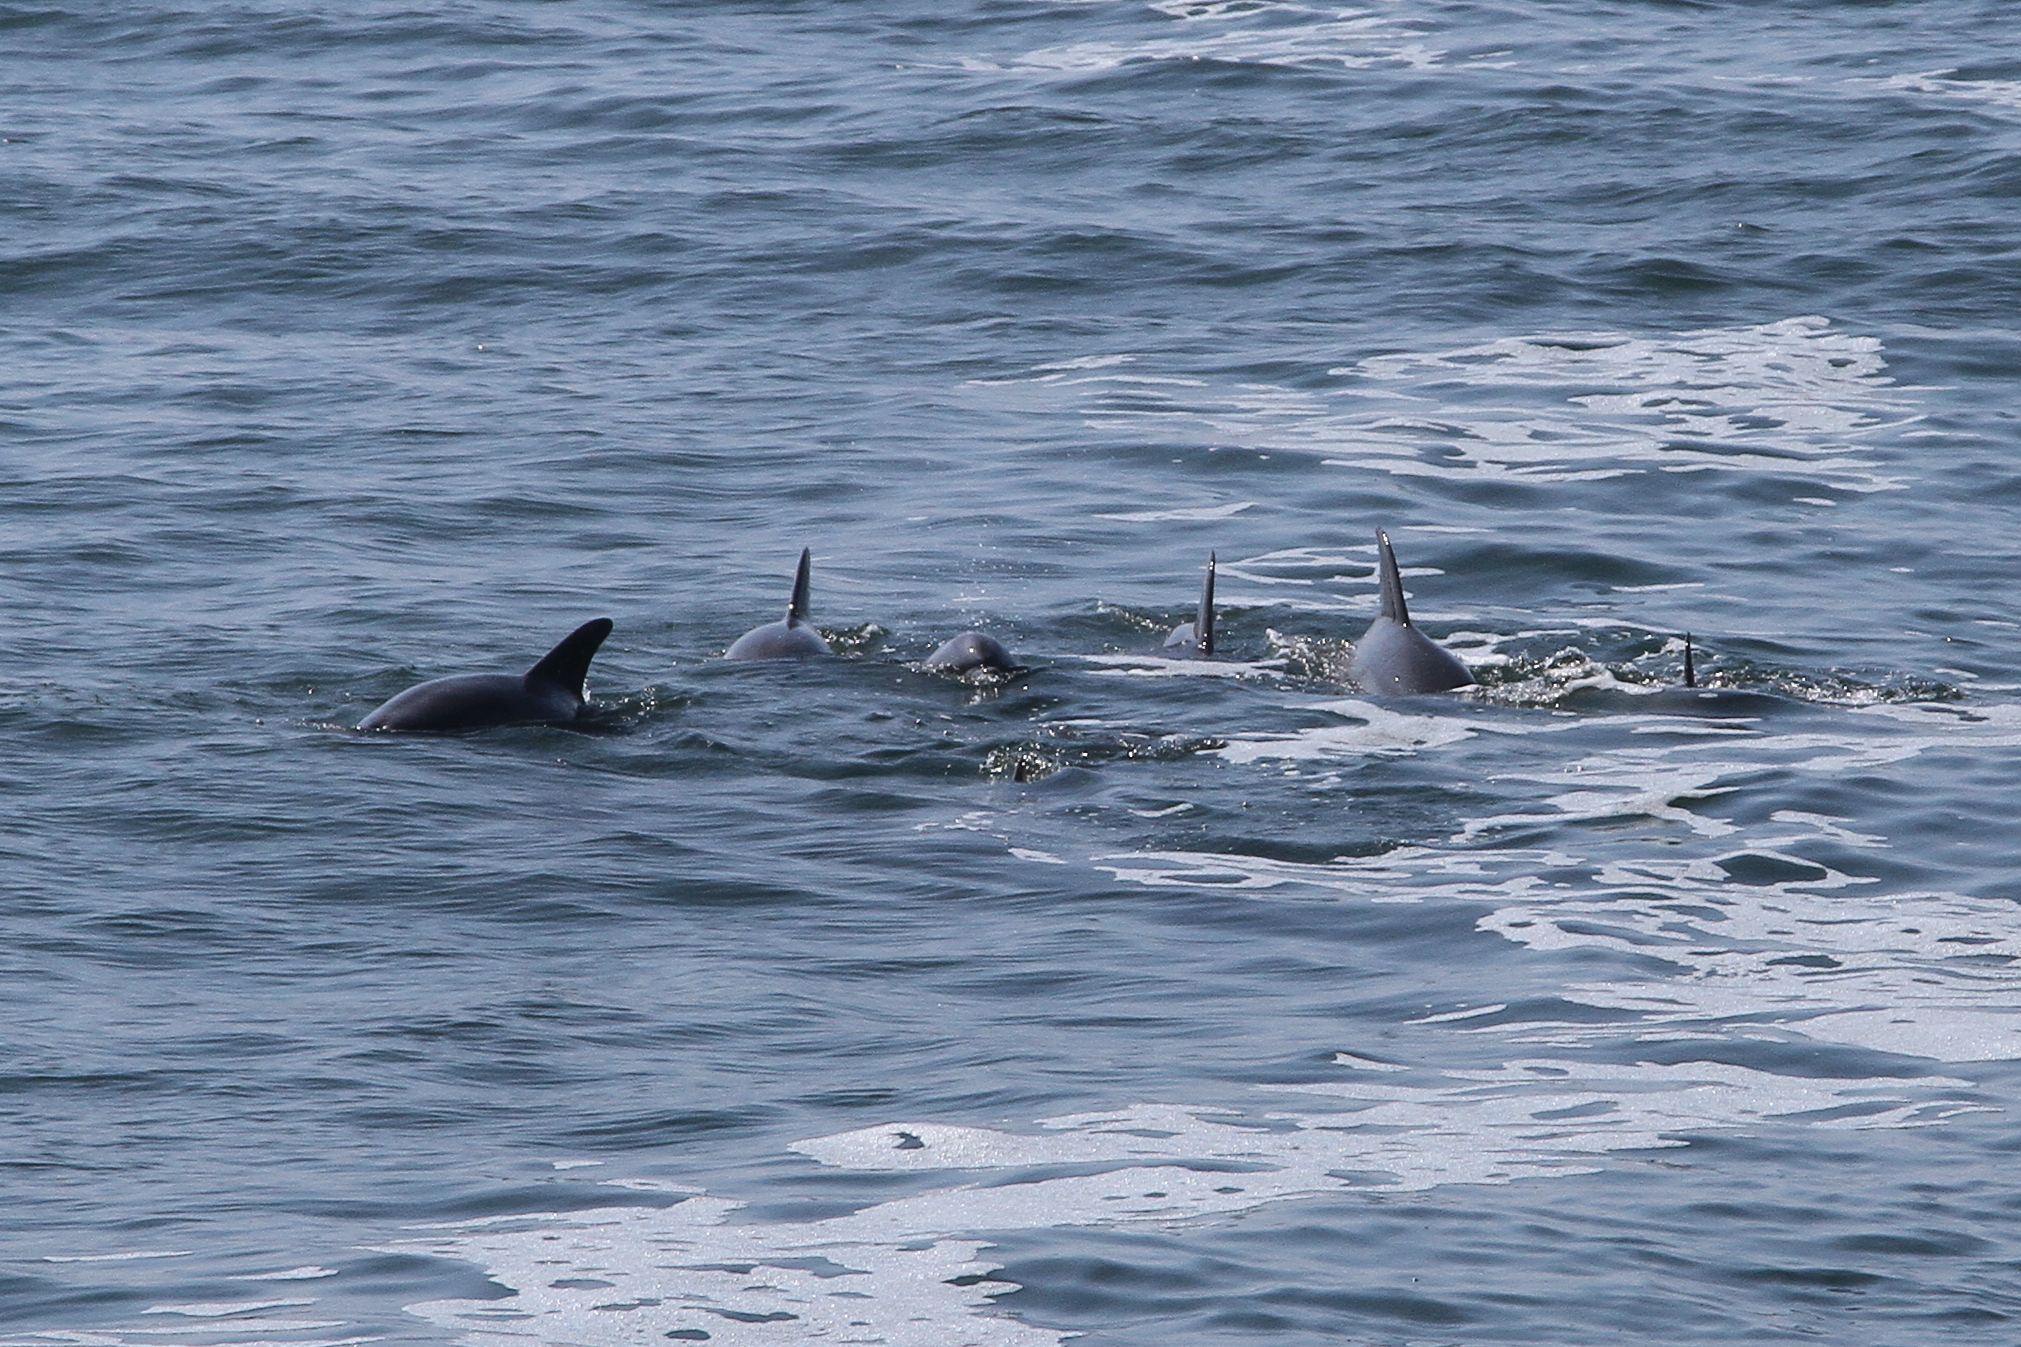 three dolphins in the water and one swimming